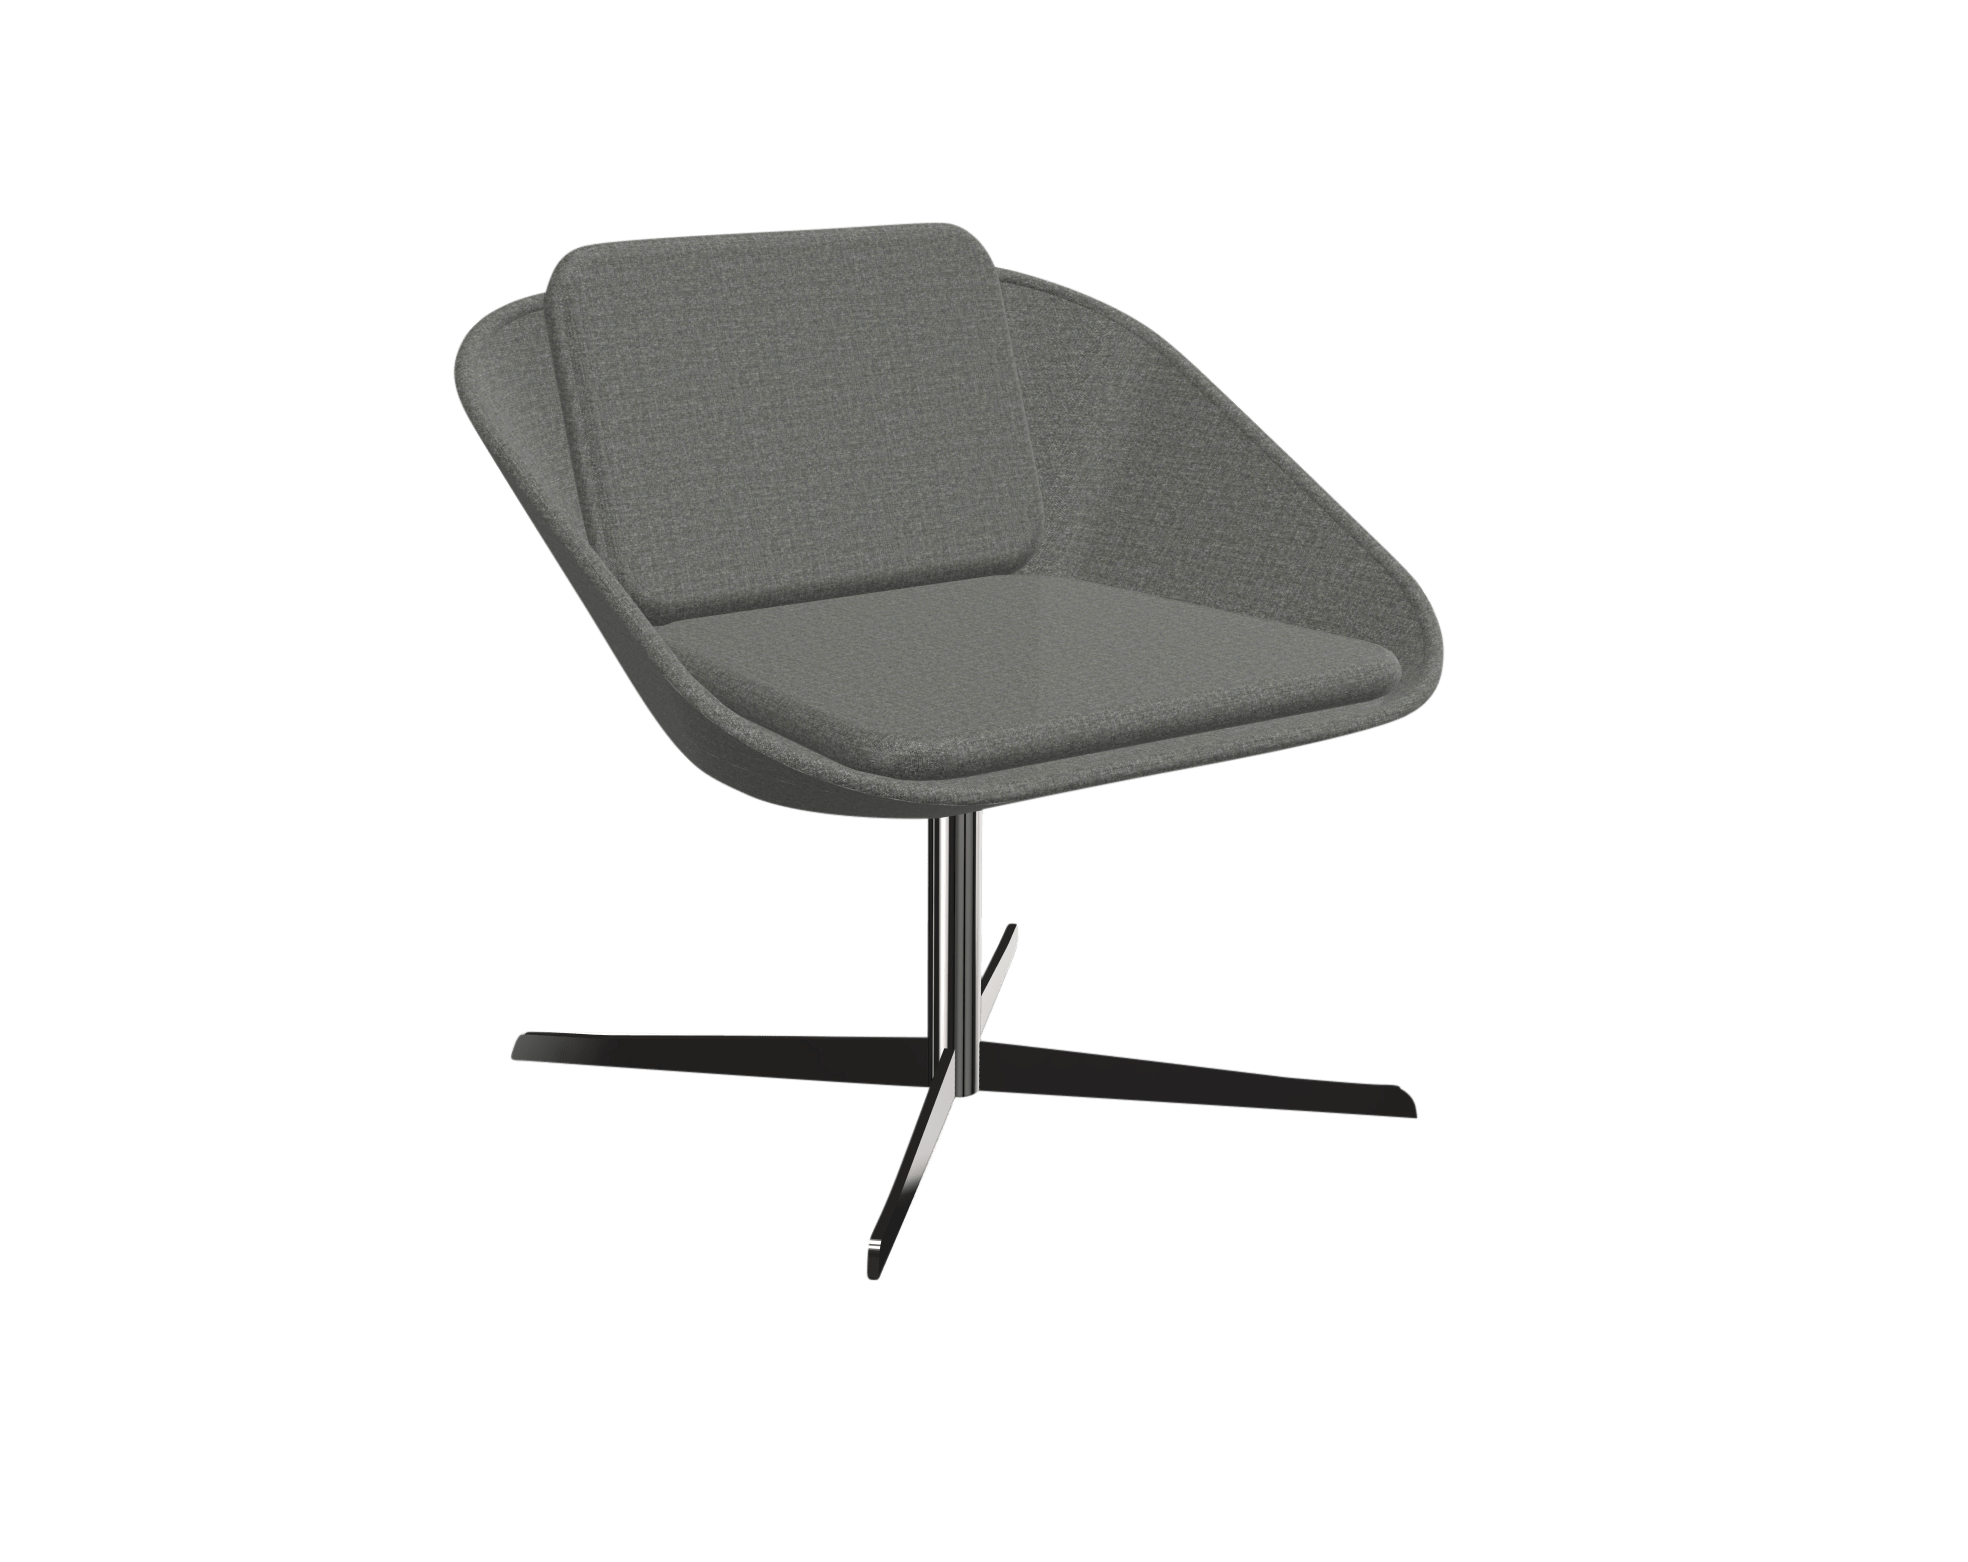 A grey chair with a black base